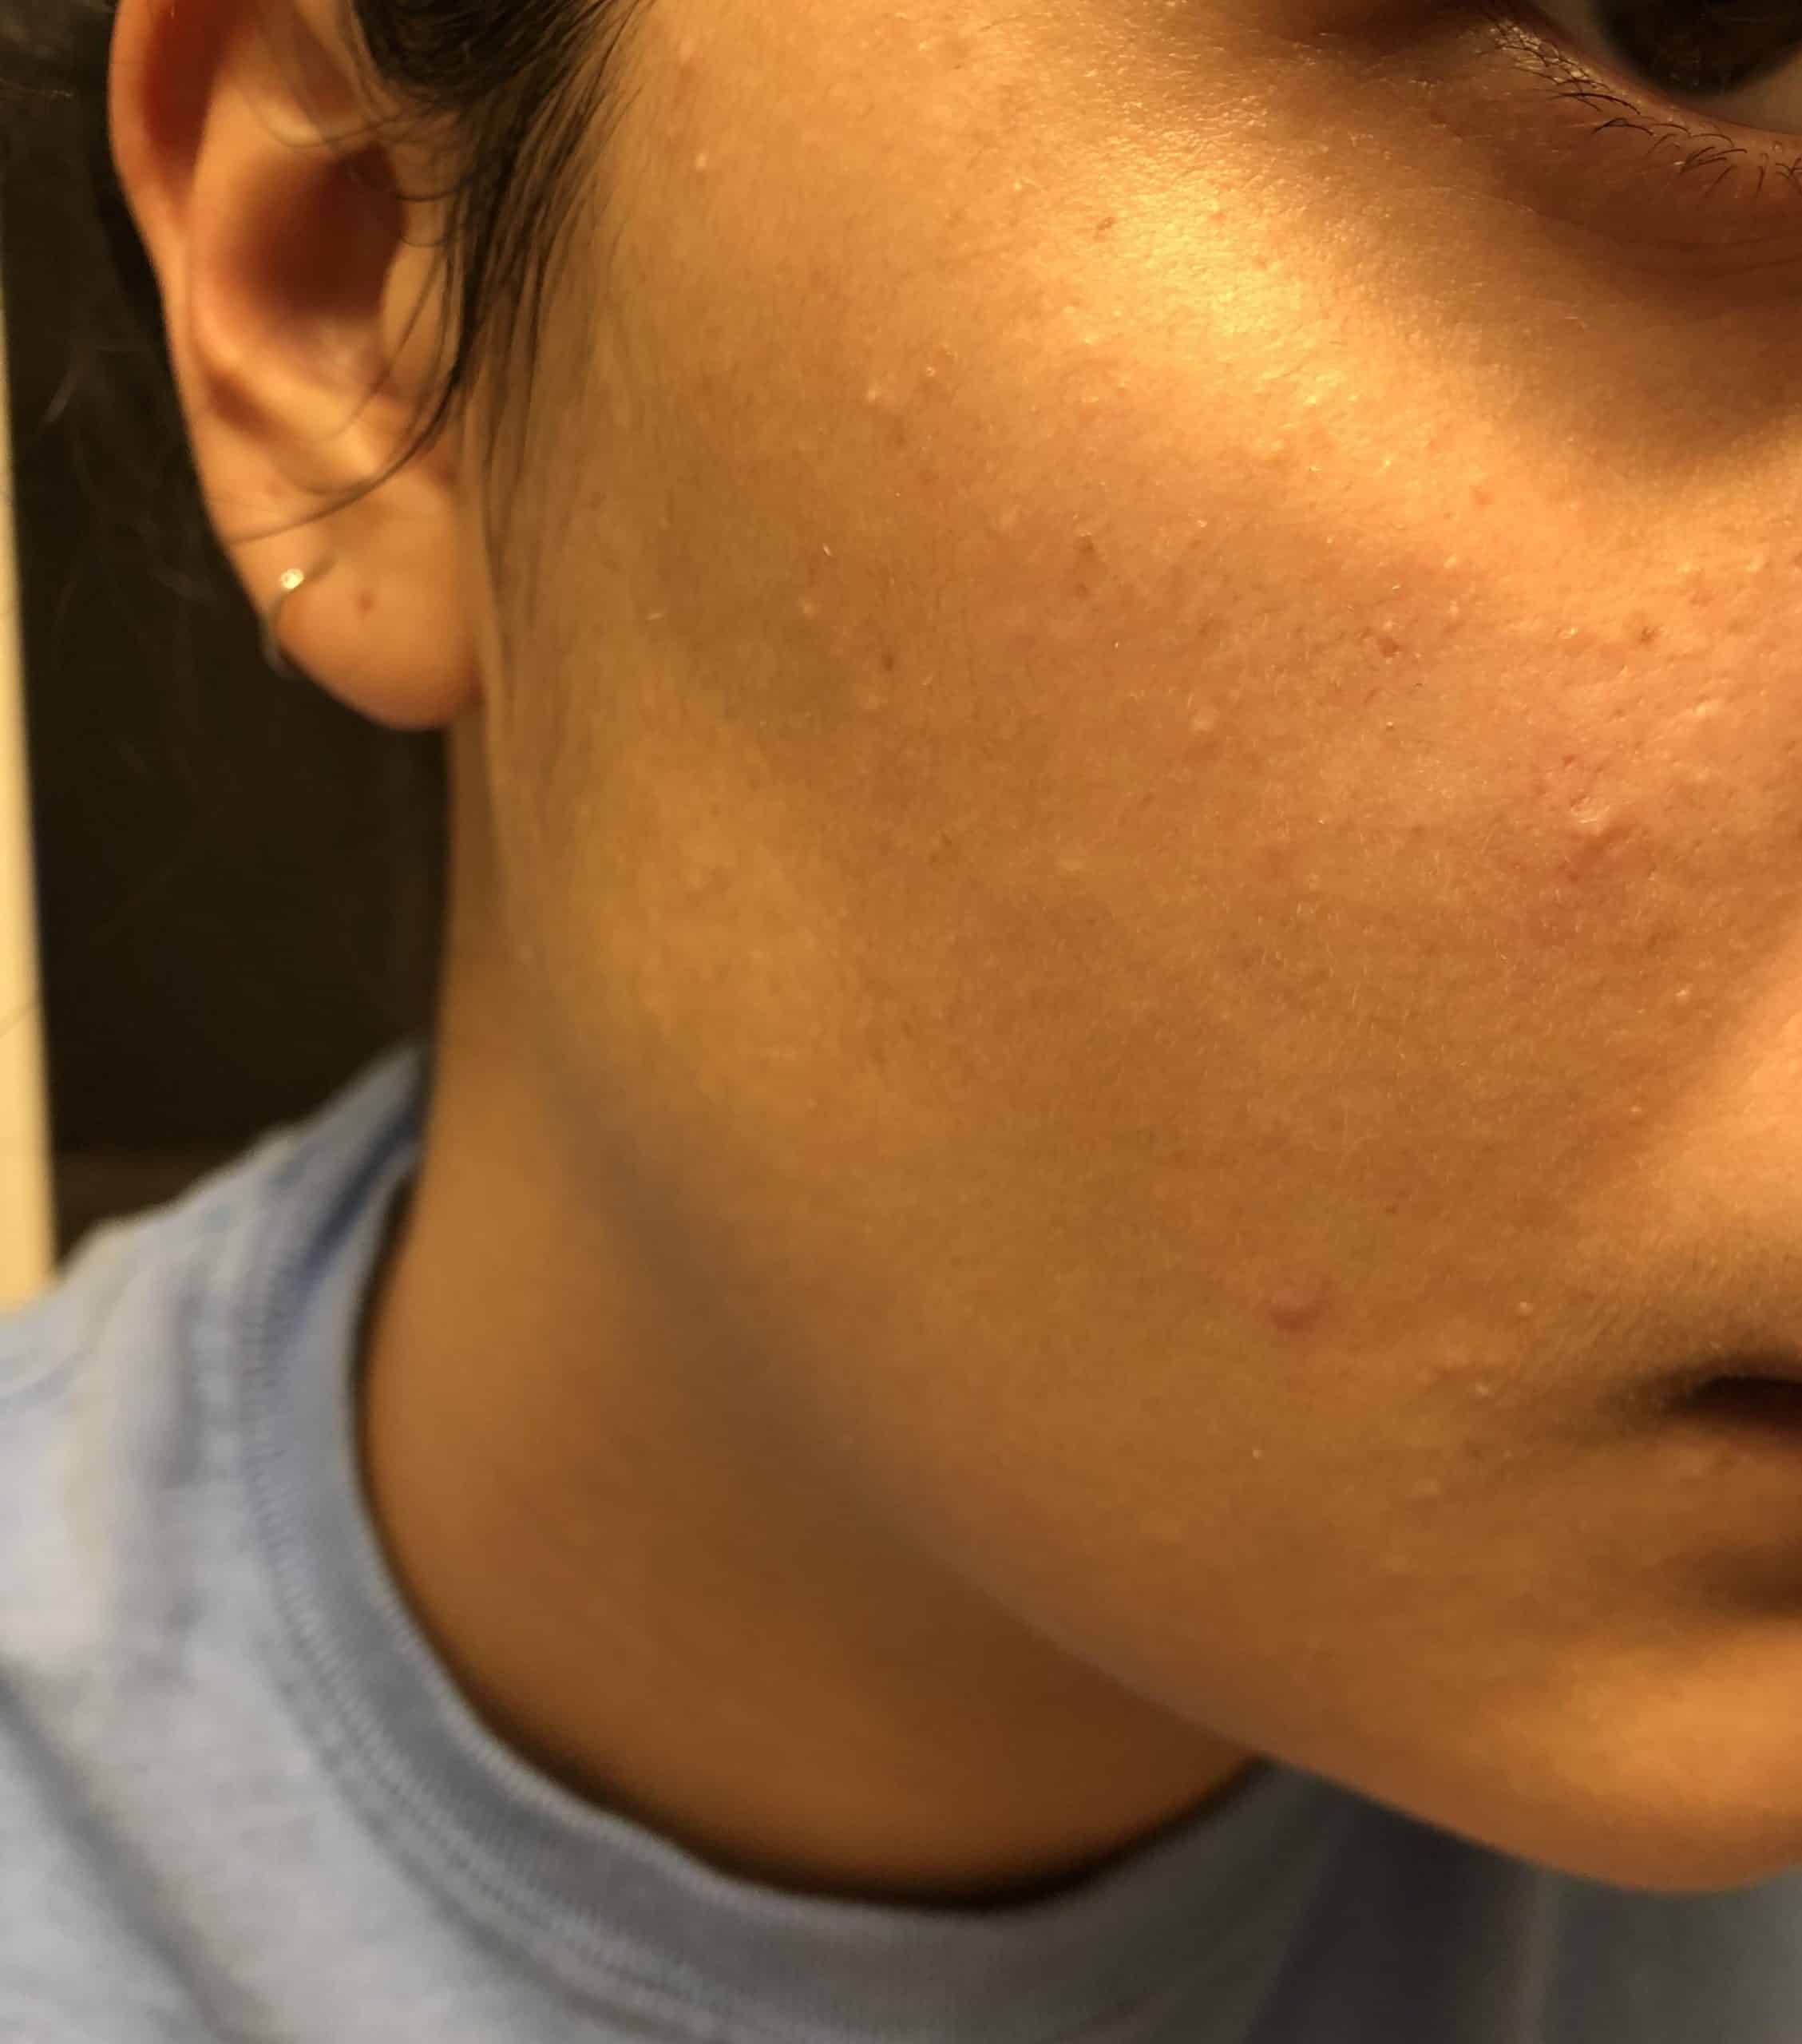 [Skin Concern] I just noticed all these little white bumps on my face ...